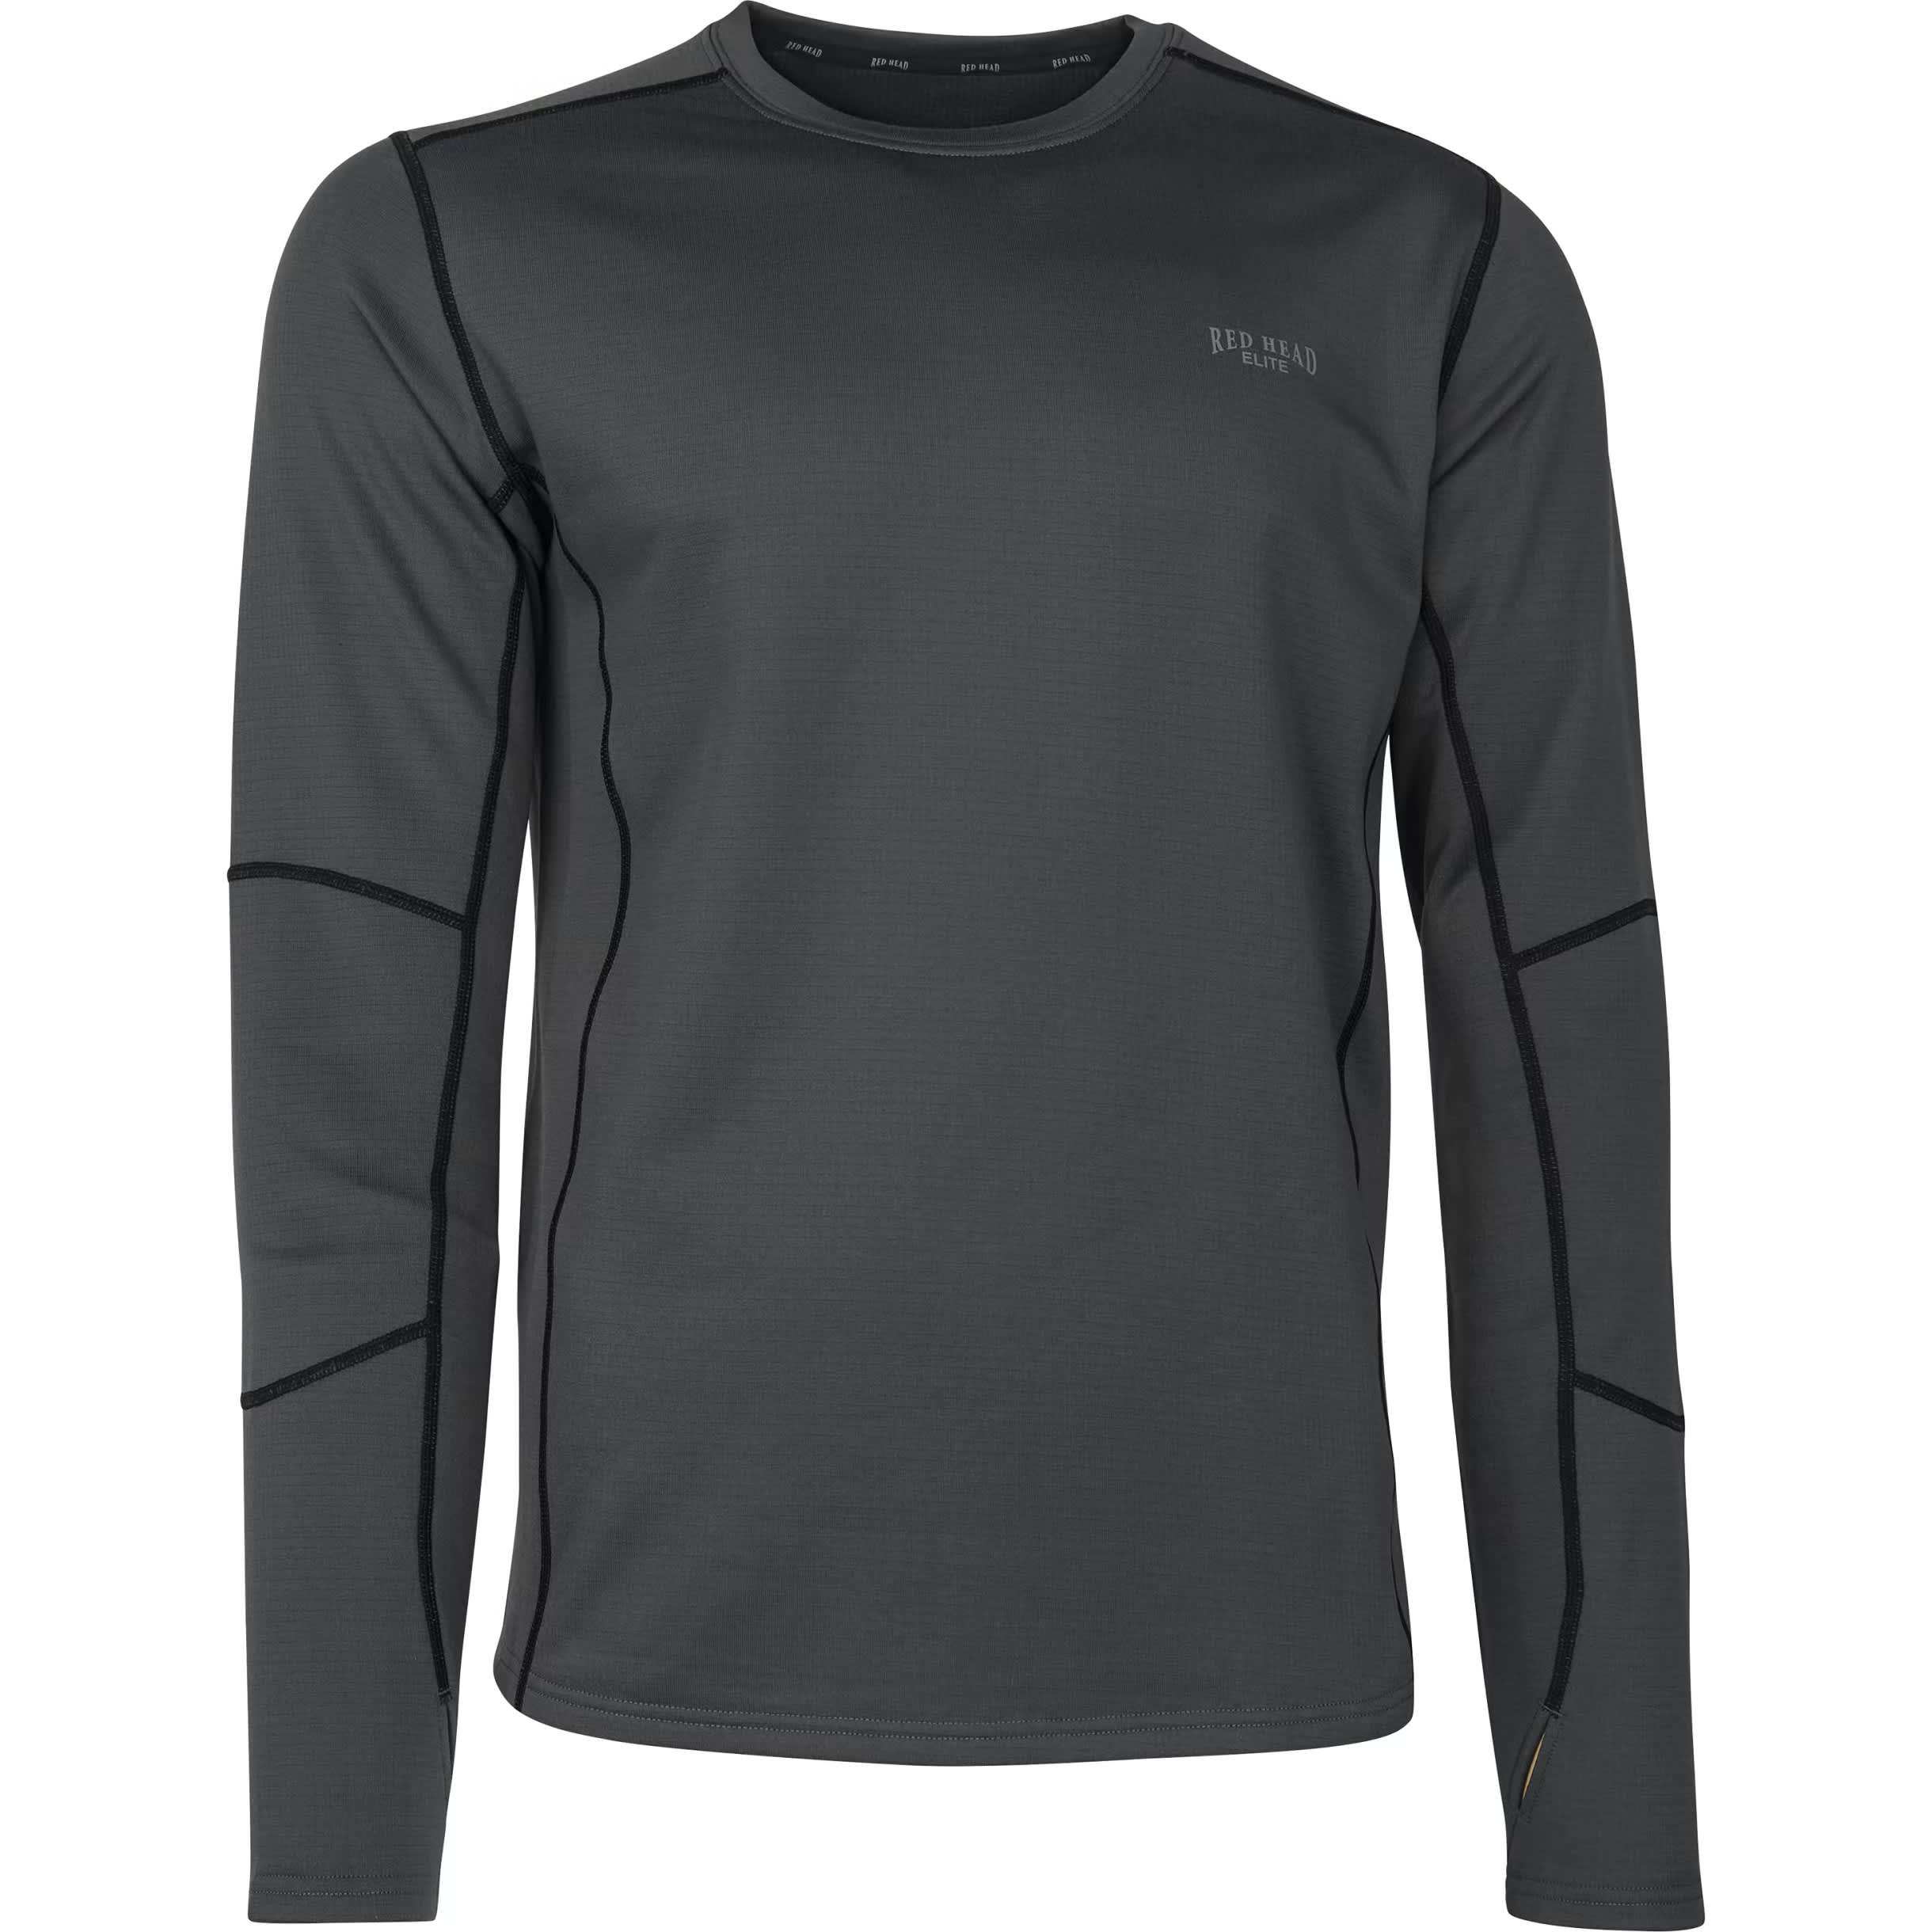 Under Armour Women's ColdGear Base 4.0 Crew Extreme Baselayer - My